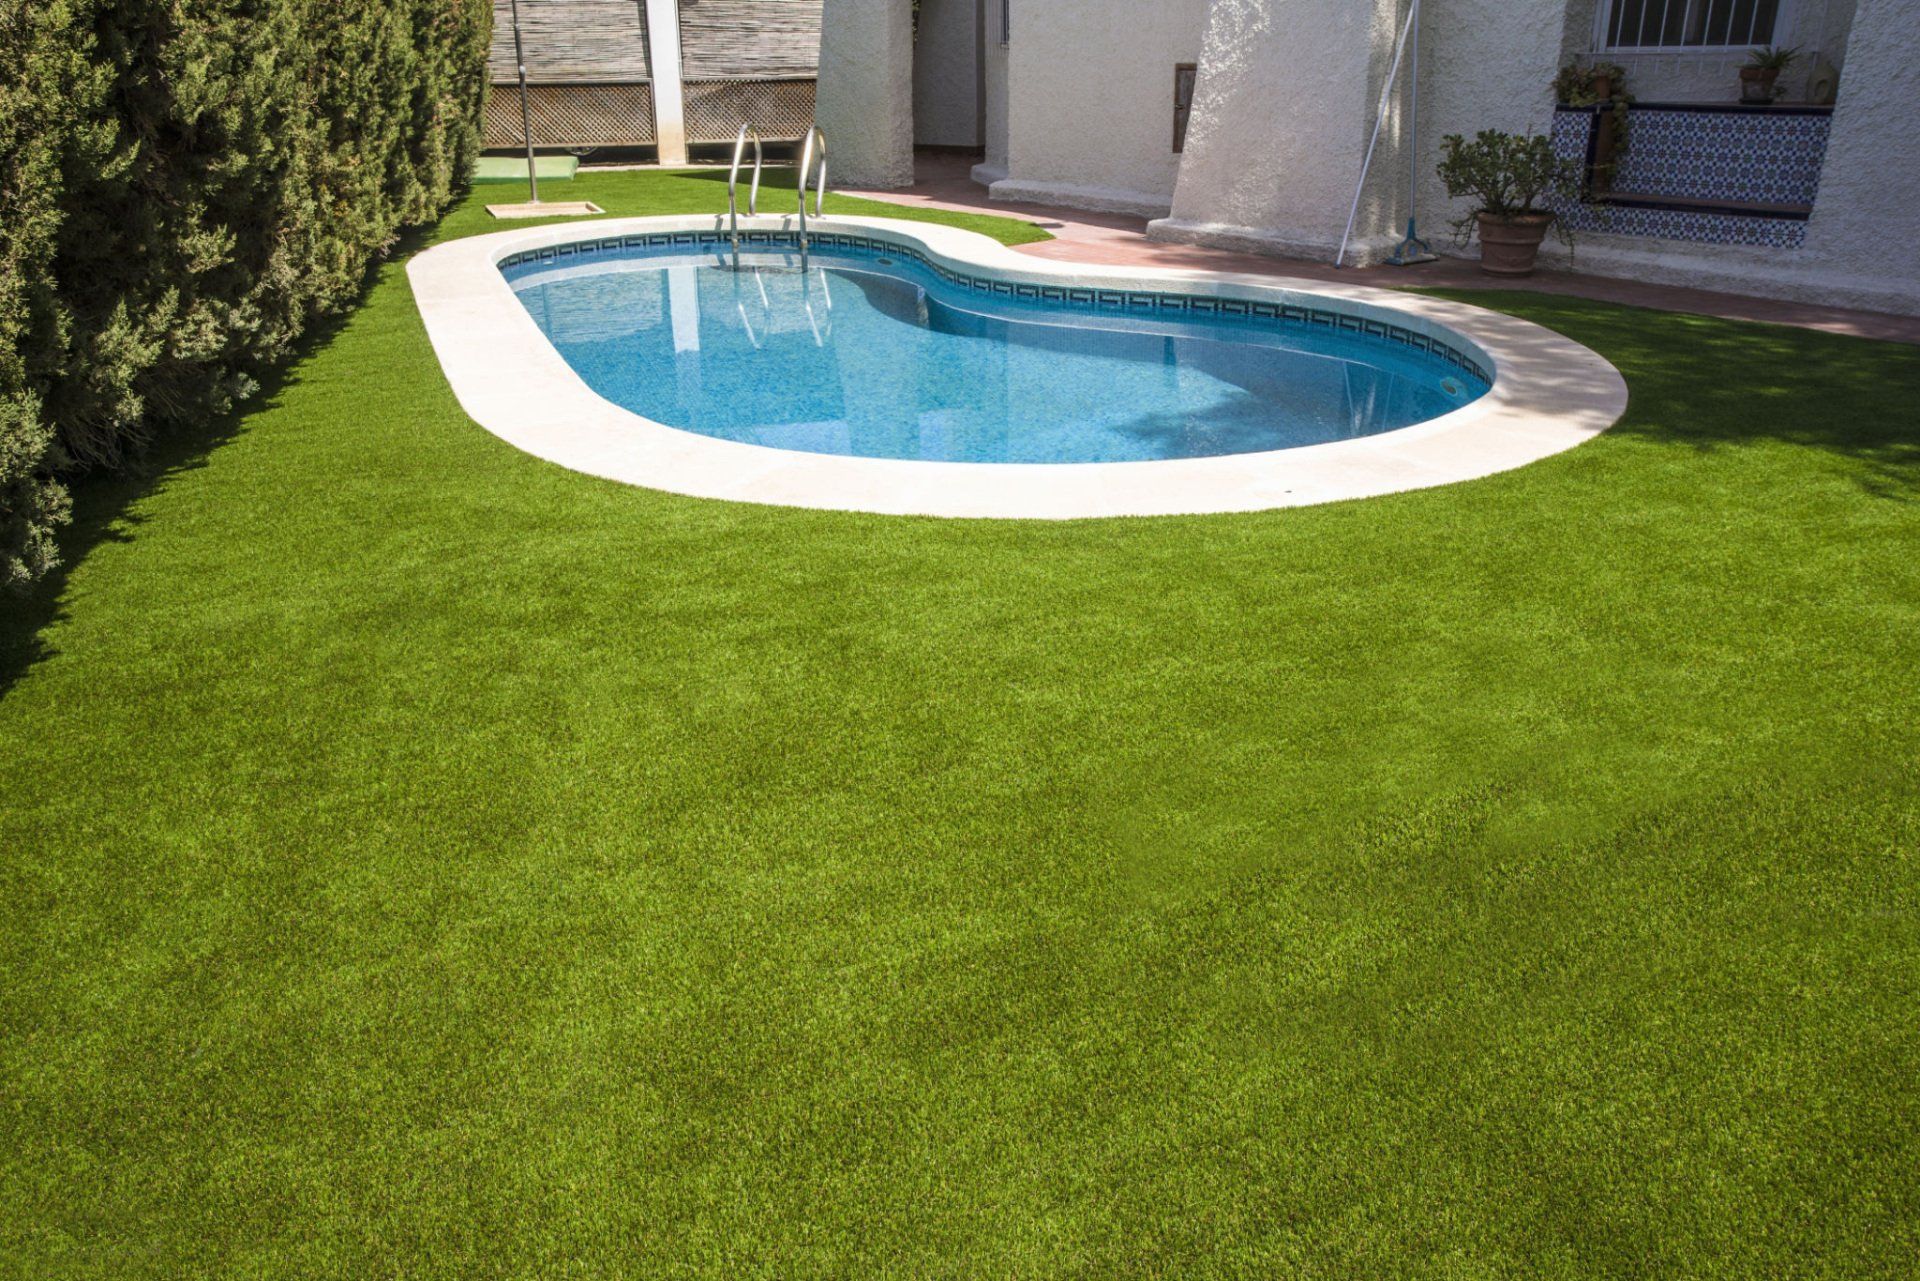 Synthetic turf system installed around a pool in a property in Scottsdale AZ